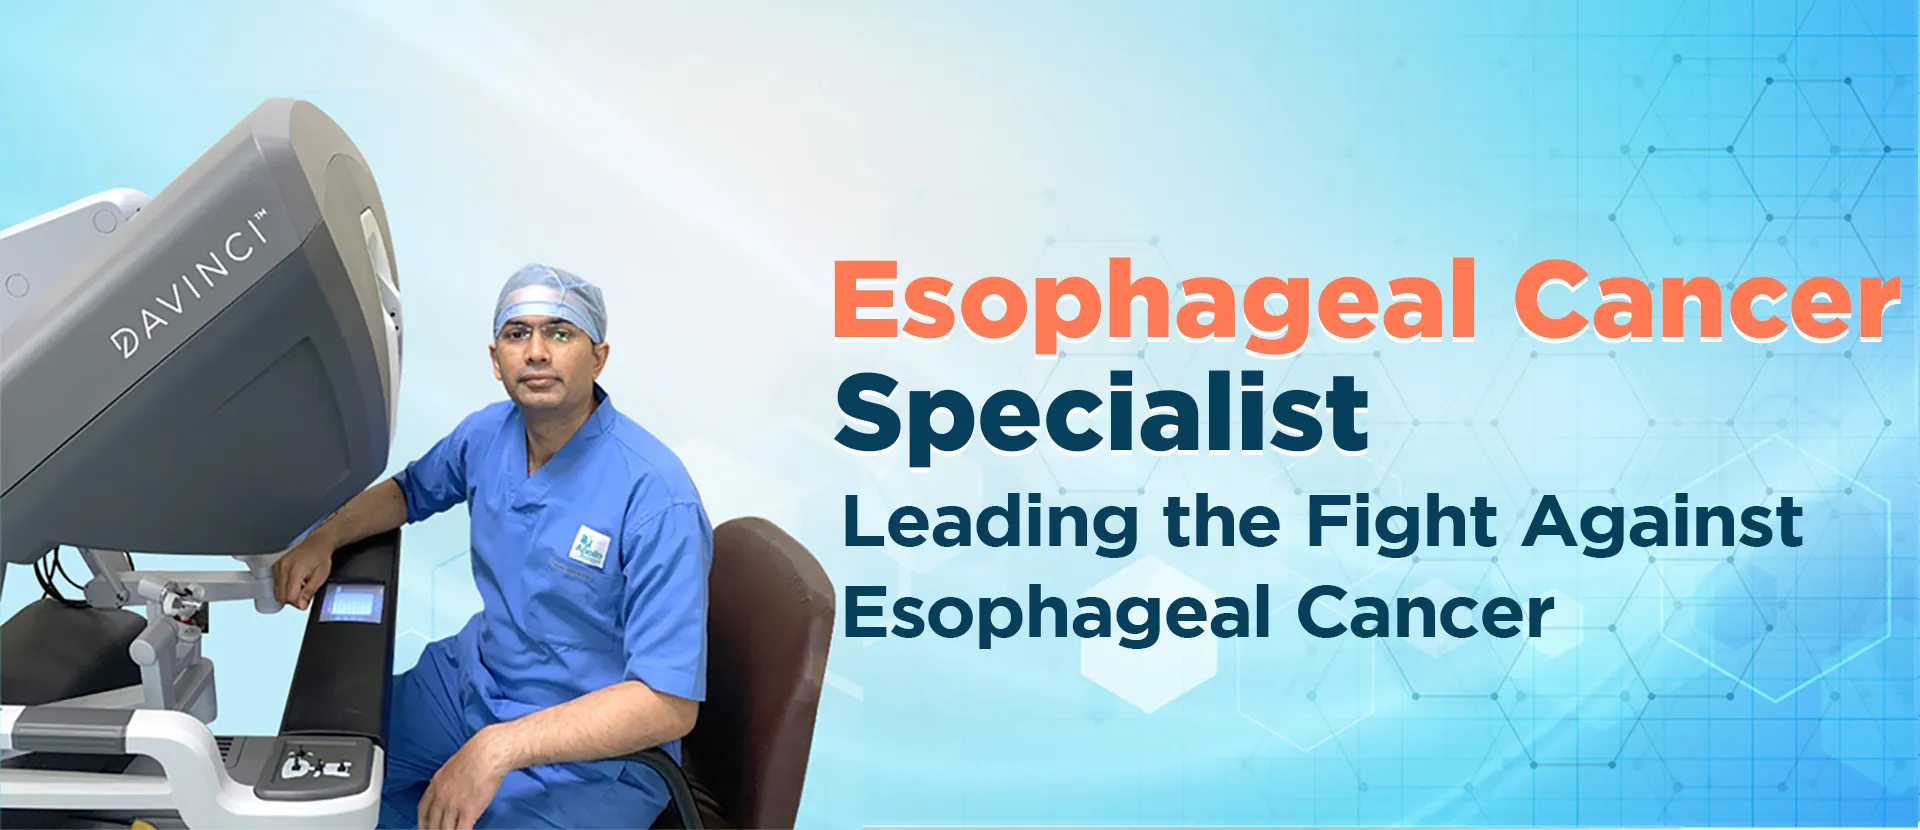 Best Esophageal cancer specialist and esophageal cancer doctor in India